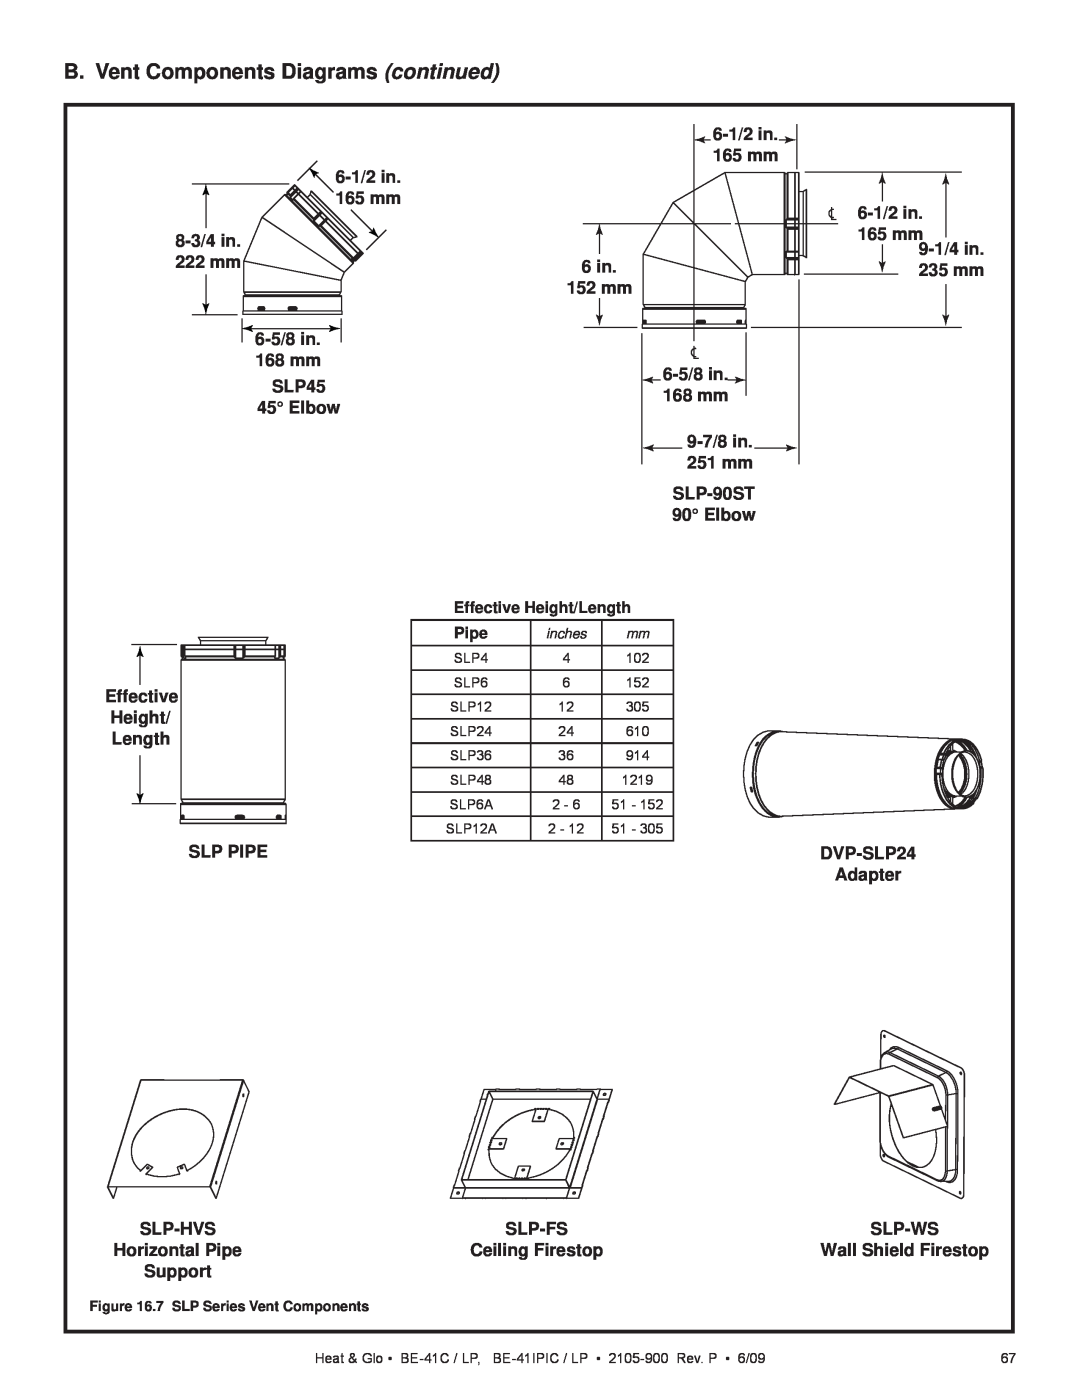 Heat & Glo LifeStyle BE-41IPILPC B. Vent Components Diagrams continued, 6-1/2in 165 mm 8-3/4in 222 mm 6-5/8in 168 mm 